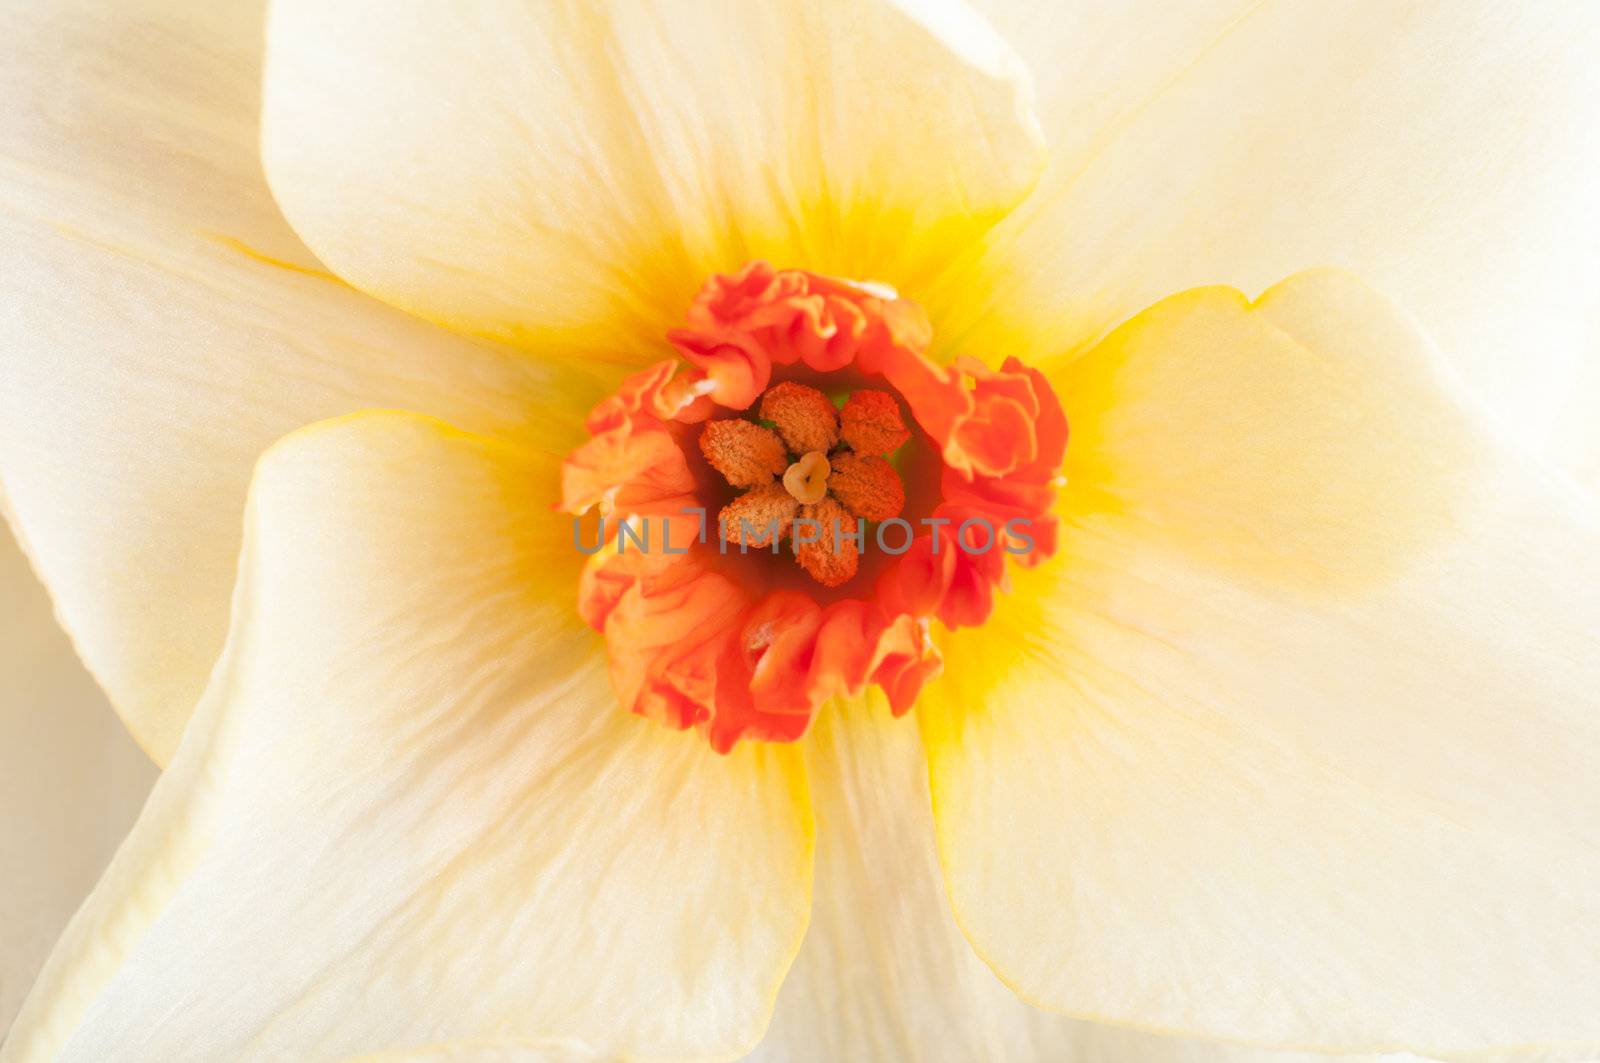 Narcissus Flower Macro by frannyanne